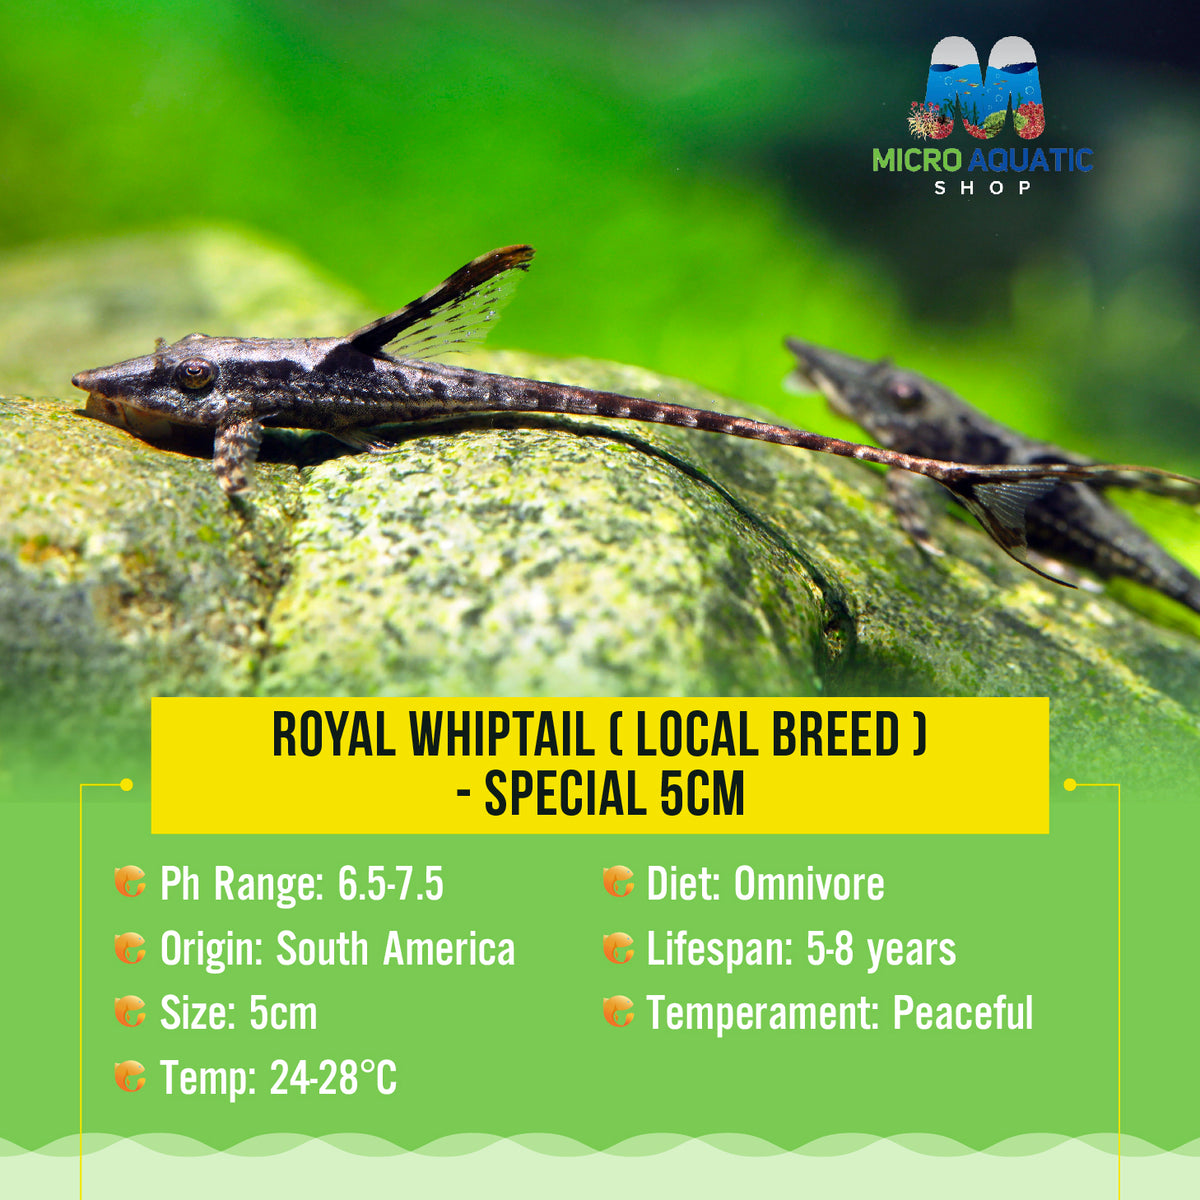 Royal Whiptail ( Local Breed ) - SPECIAL 5cm